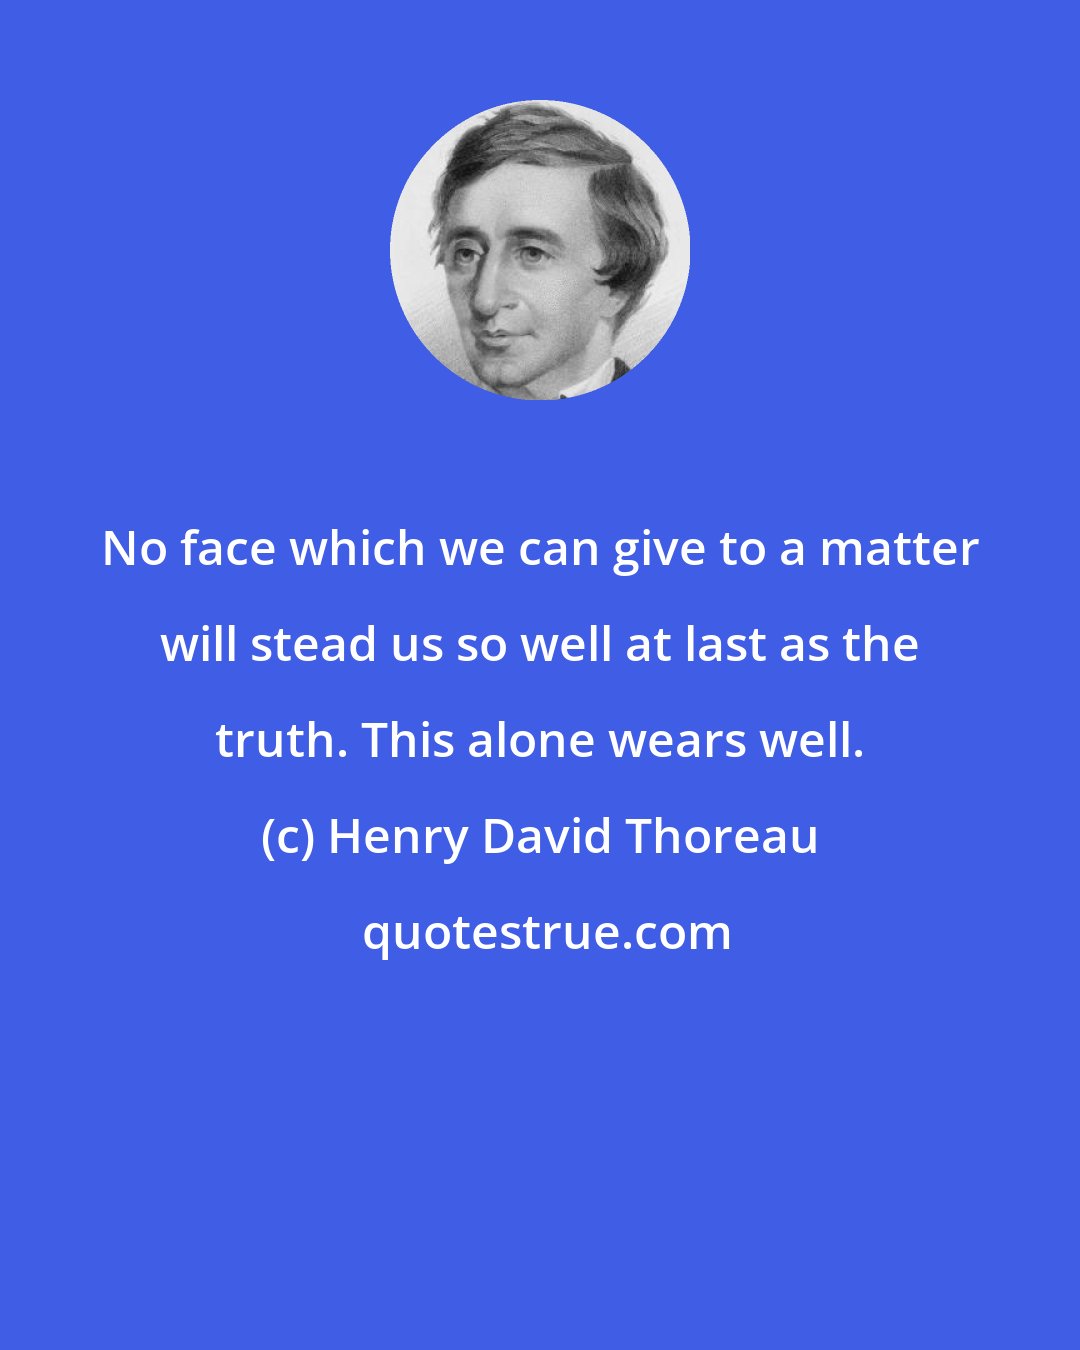 Henry David Thoreau: No face which we can give to a matter will stead us so well at last as the truth. This alone wears well.